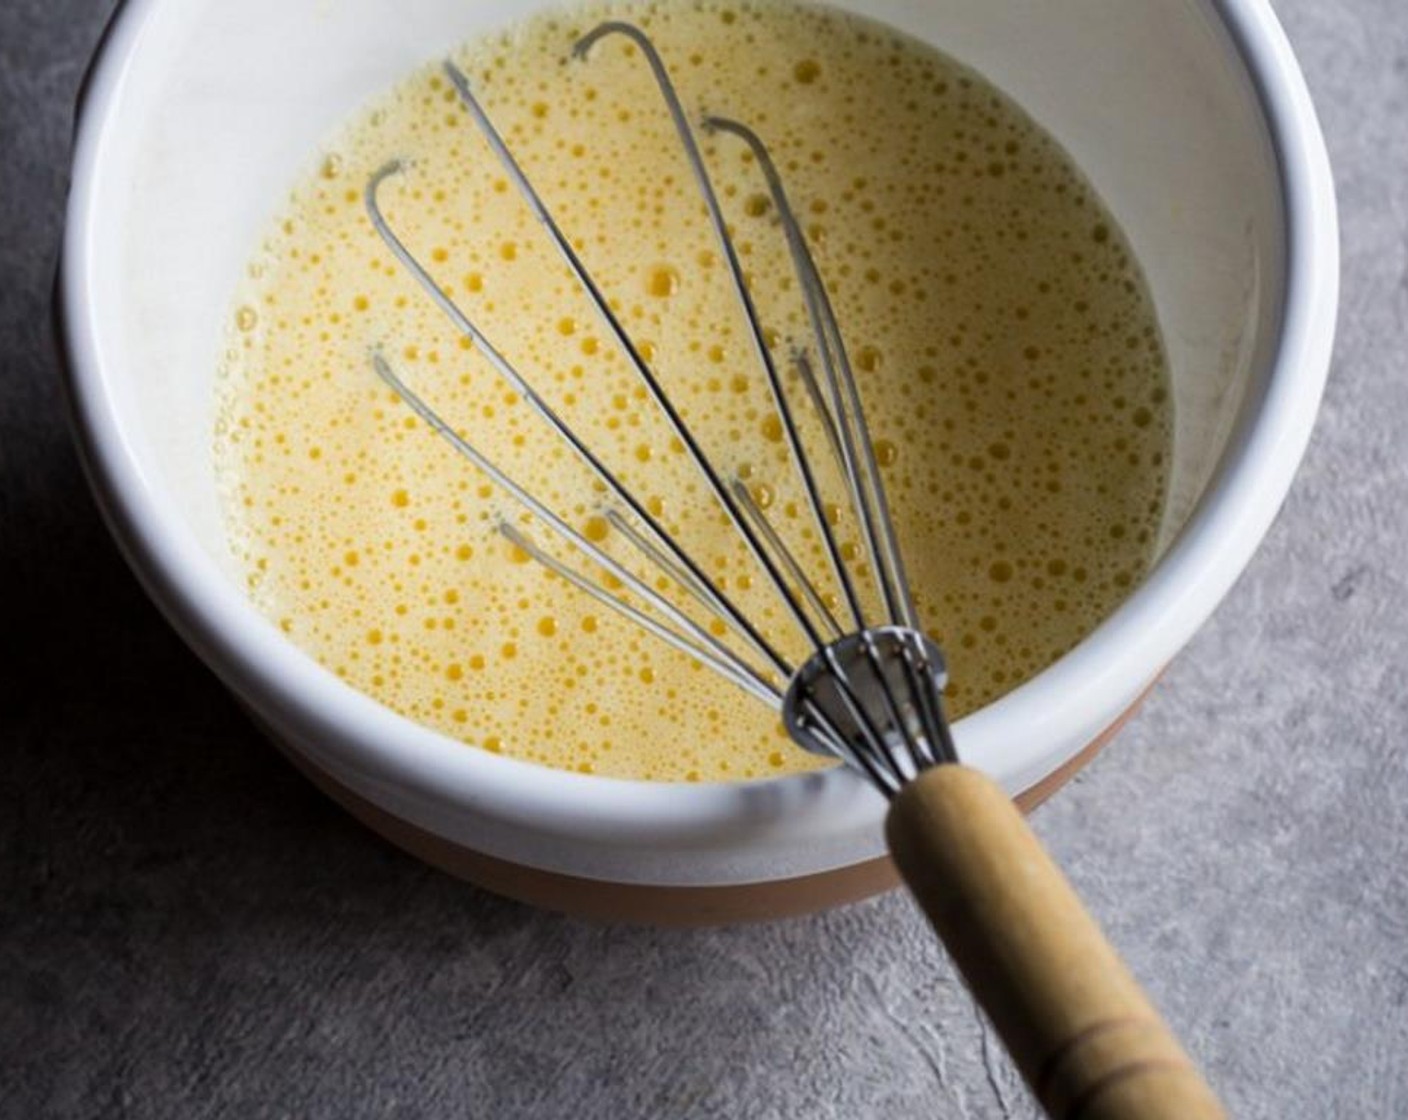 step 4 While whisking, slowly add one ladle of the soup at a time to the egg and lemon mixture to temper the mixture.